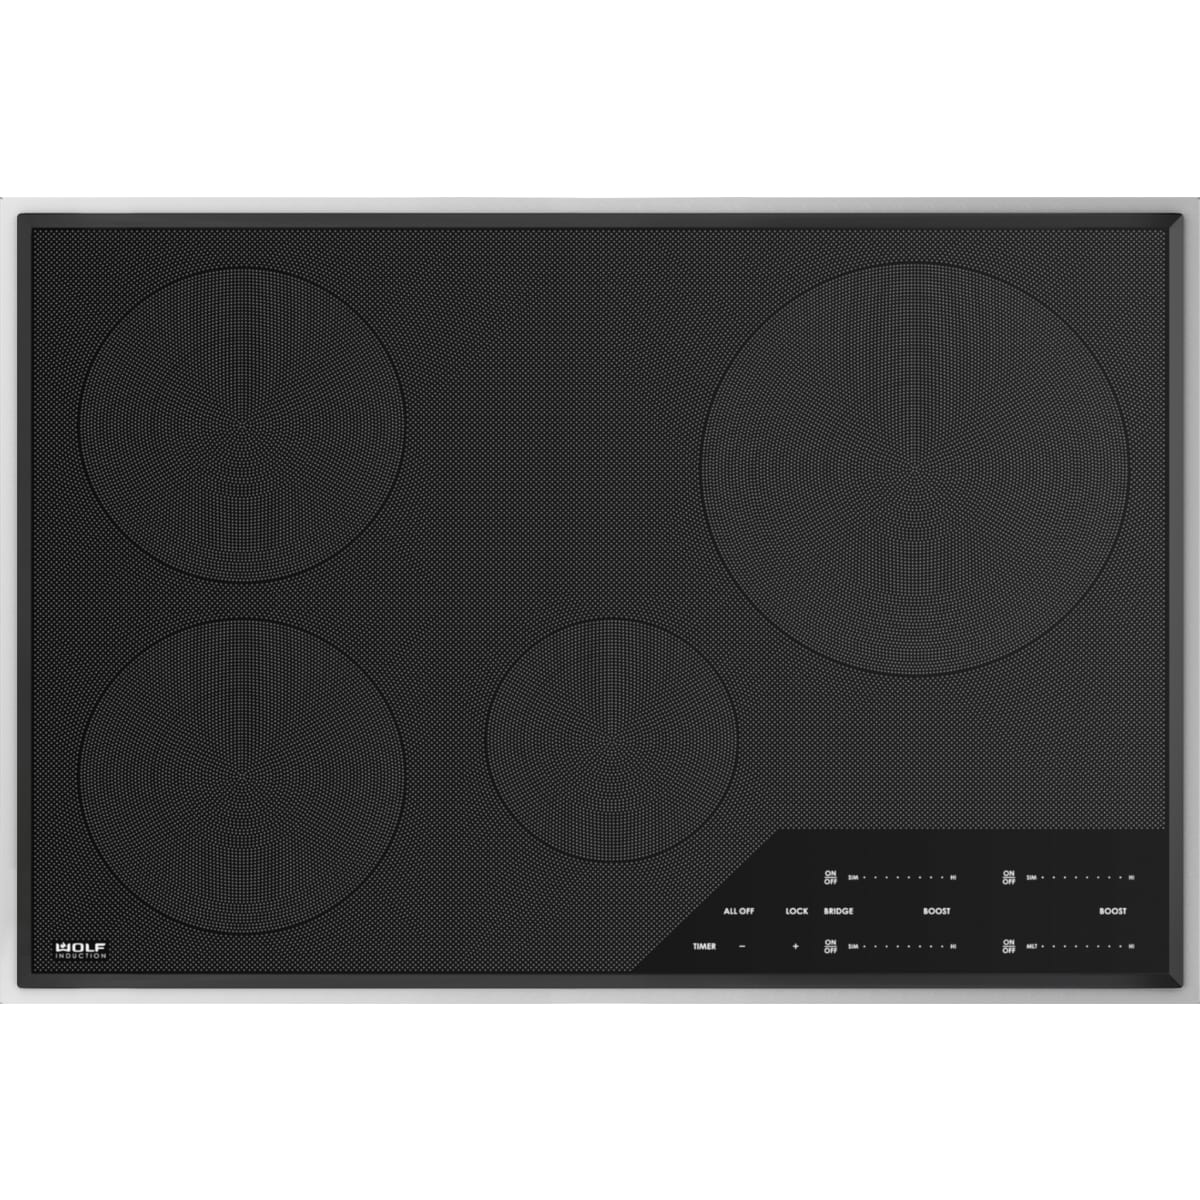 CI304TS  Wolf 30 Transitional Induction Cooktop - Dark Black Glass, Framed